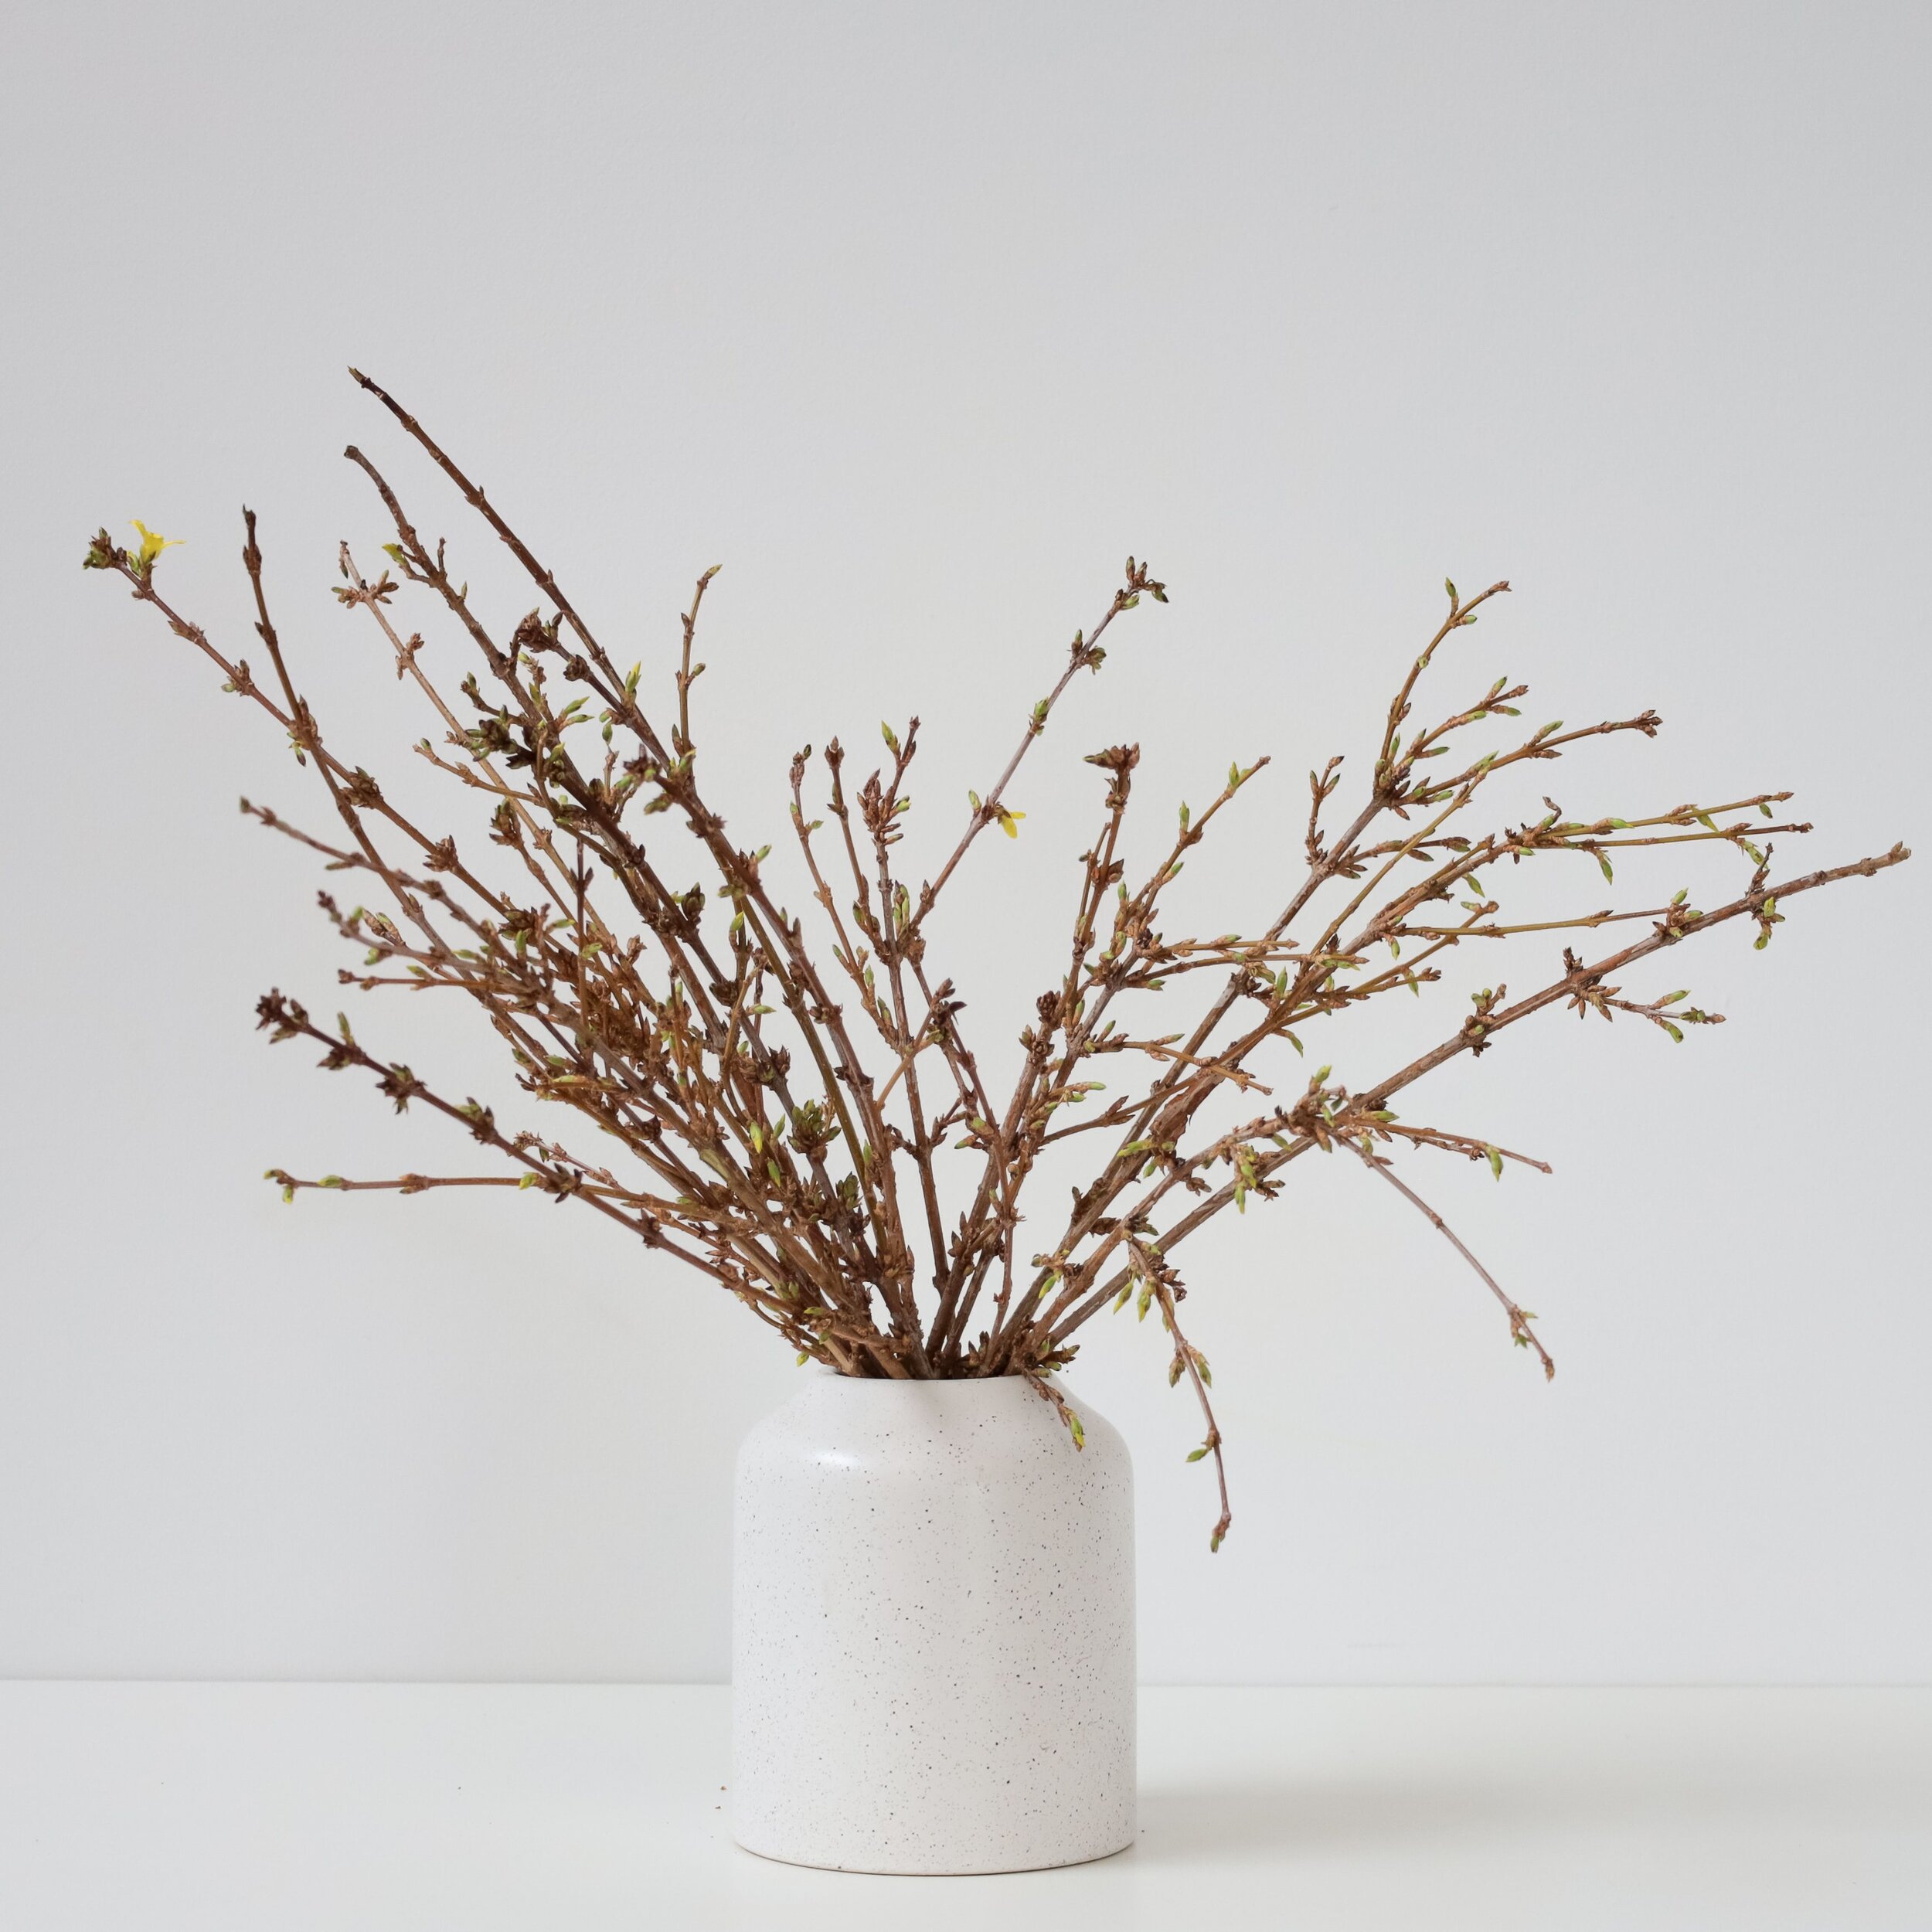 An arrangement of blooming branches in a cream colored vase sitting on a white table top